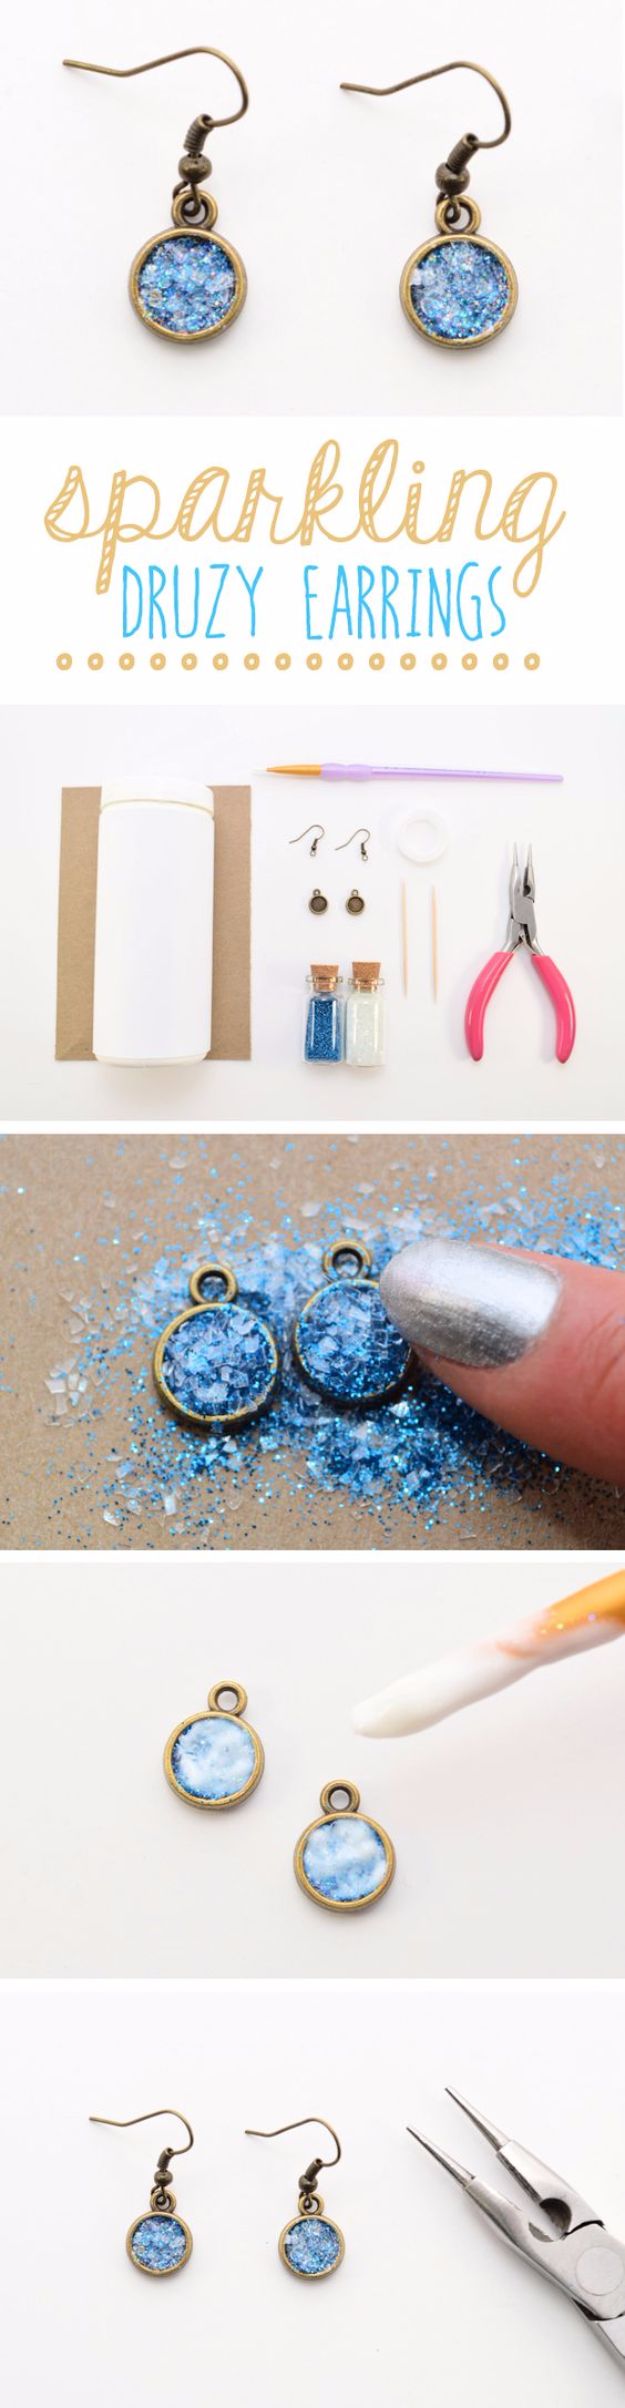 DIY Ideas WIth Glitter - Sparkling Druzy Earrings - Easy Crafts and Projects for Decoration, Gifts, and Bedroom Decor - How To Make Ombre, Mod Podge and Glitter Mason Jar Gift Ideas For Teens - Easy Clothes and Makeup Crafts For Teenagers #diyideas #glitter #crafts